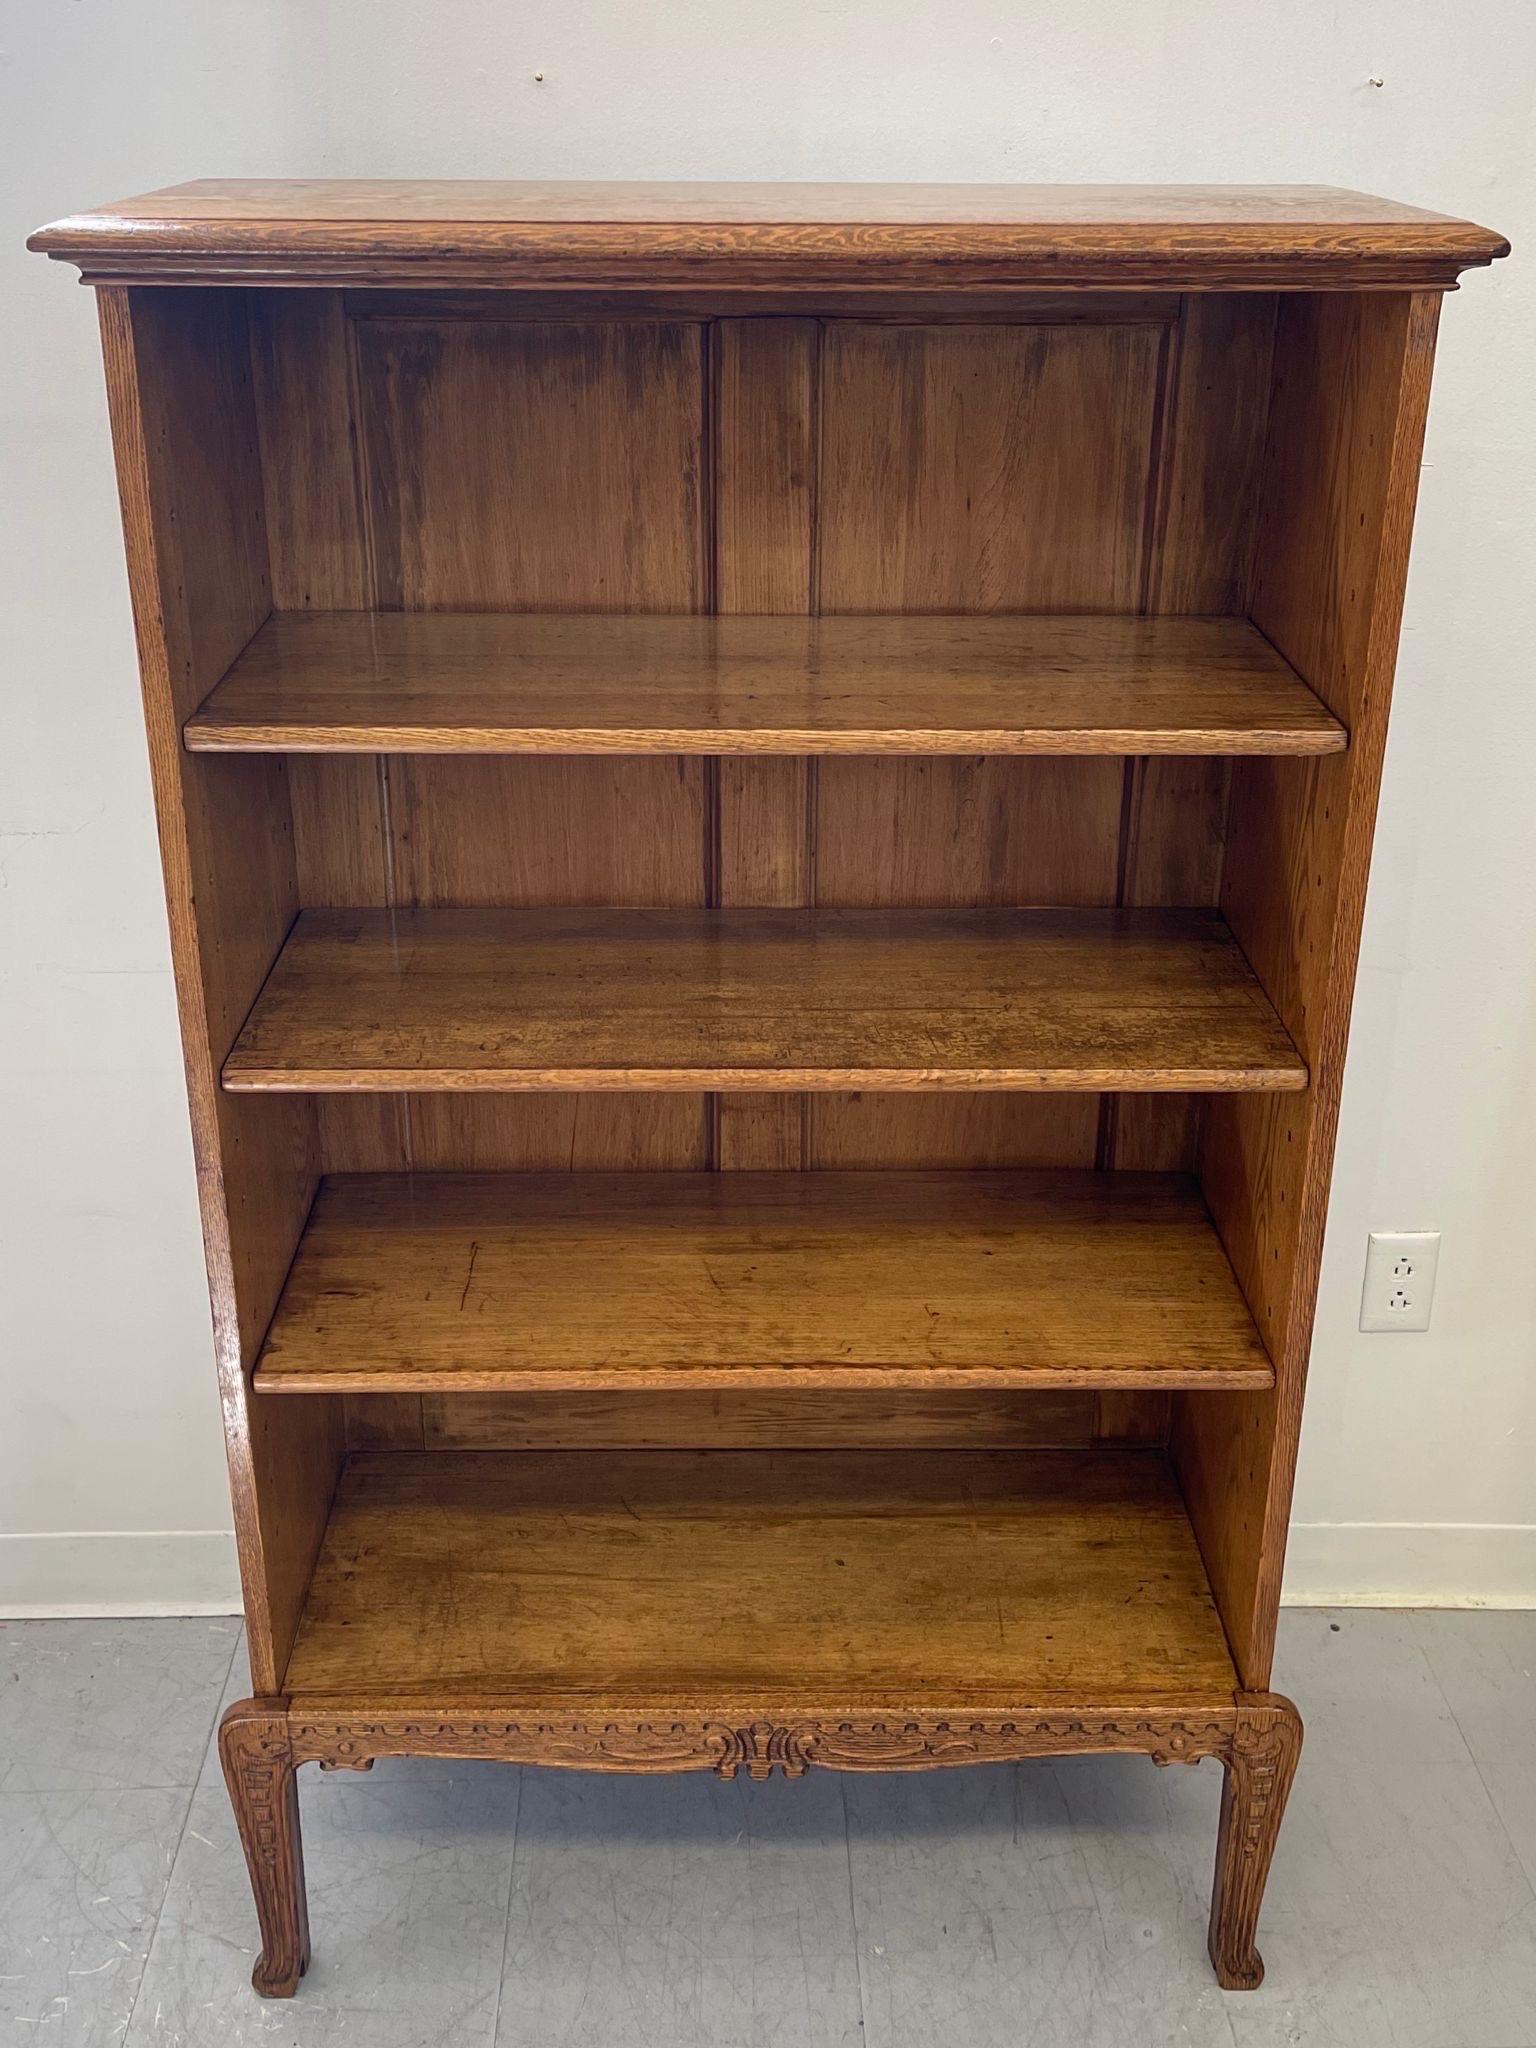 Mid-Century Modern Vintage Bookshelf With Carved Wood Accents .